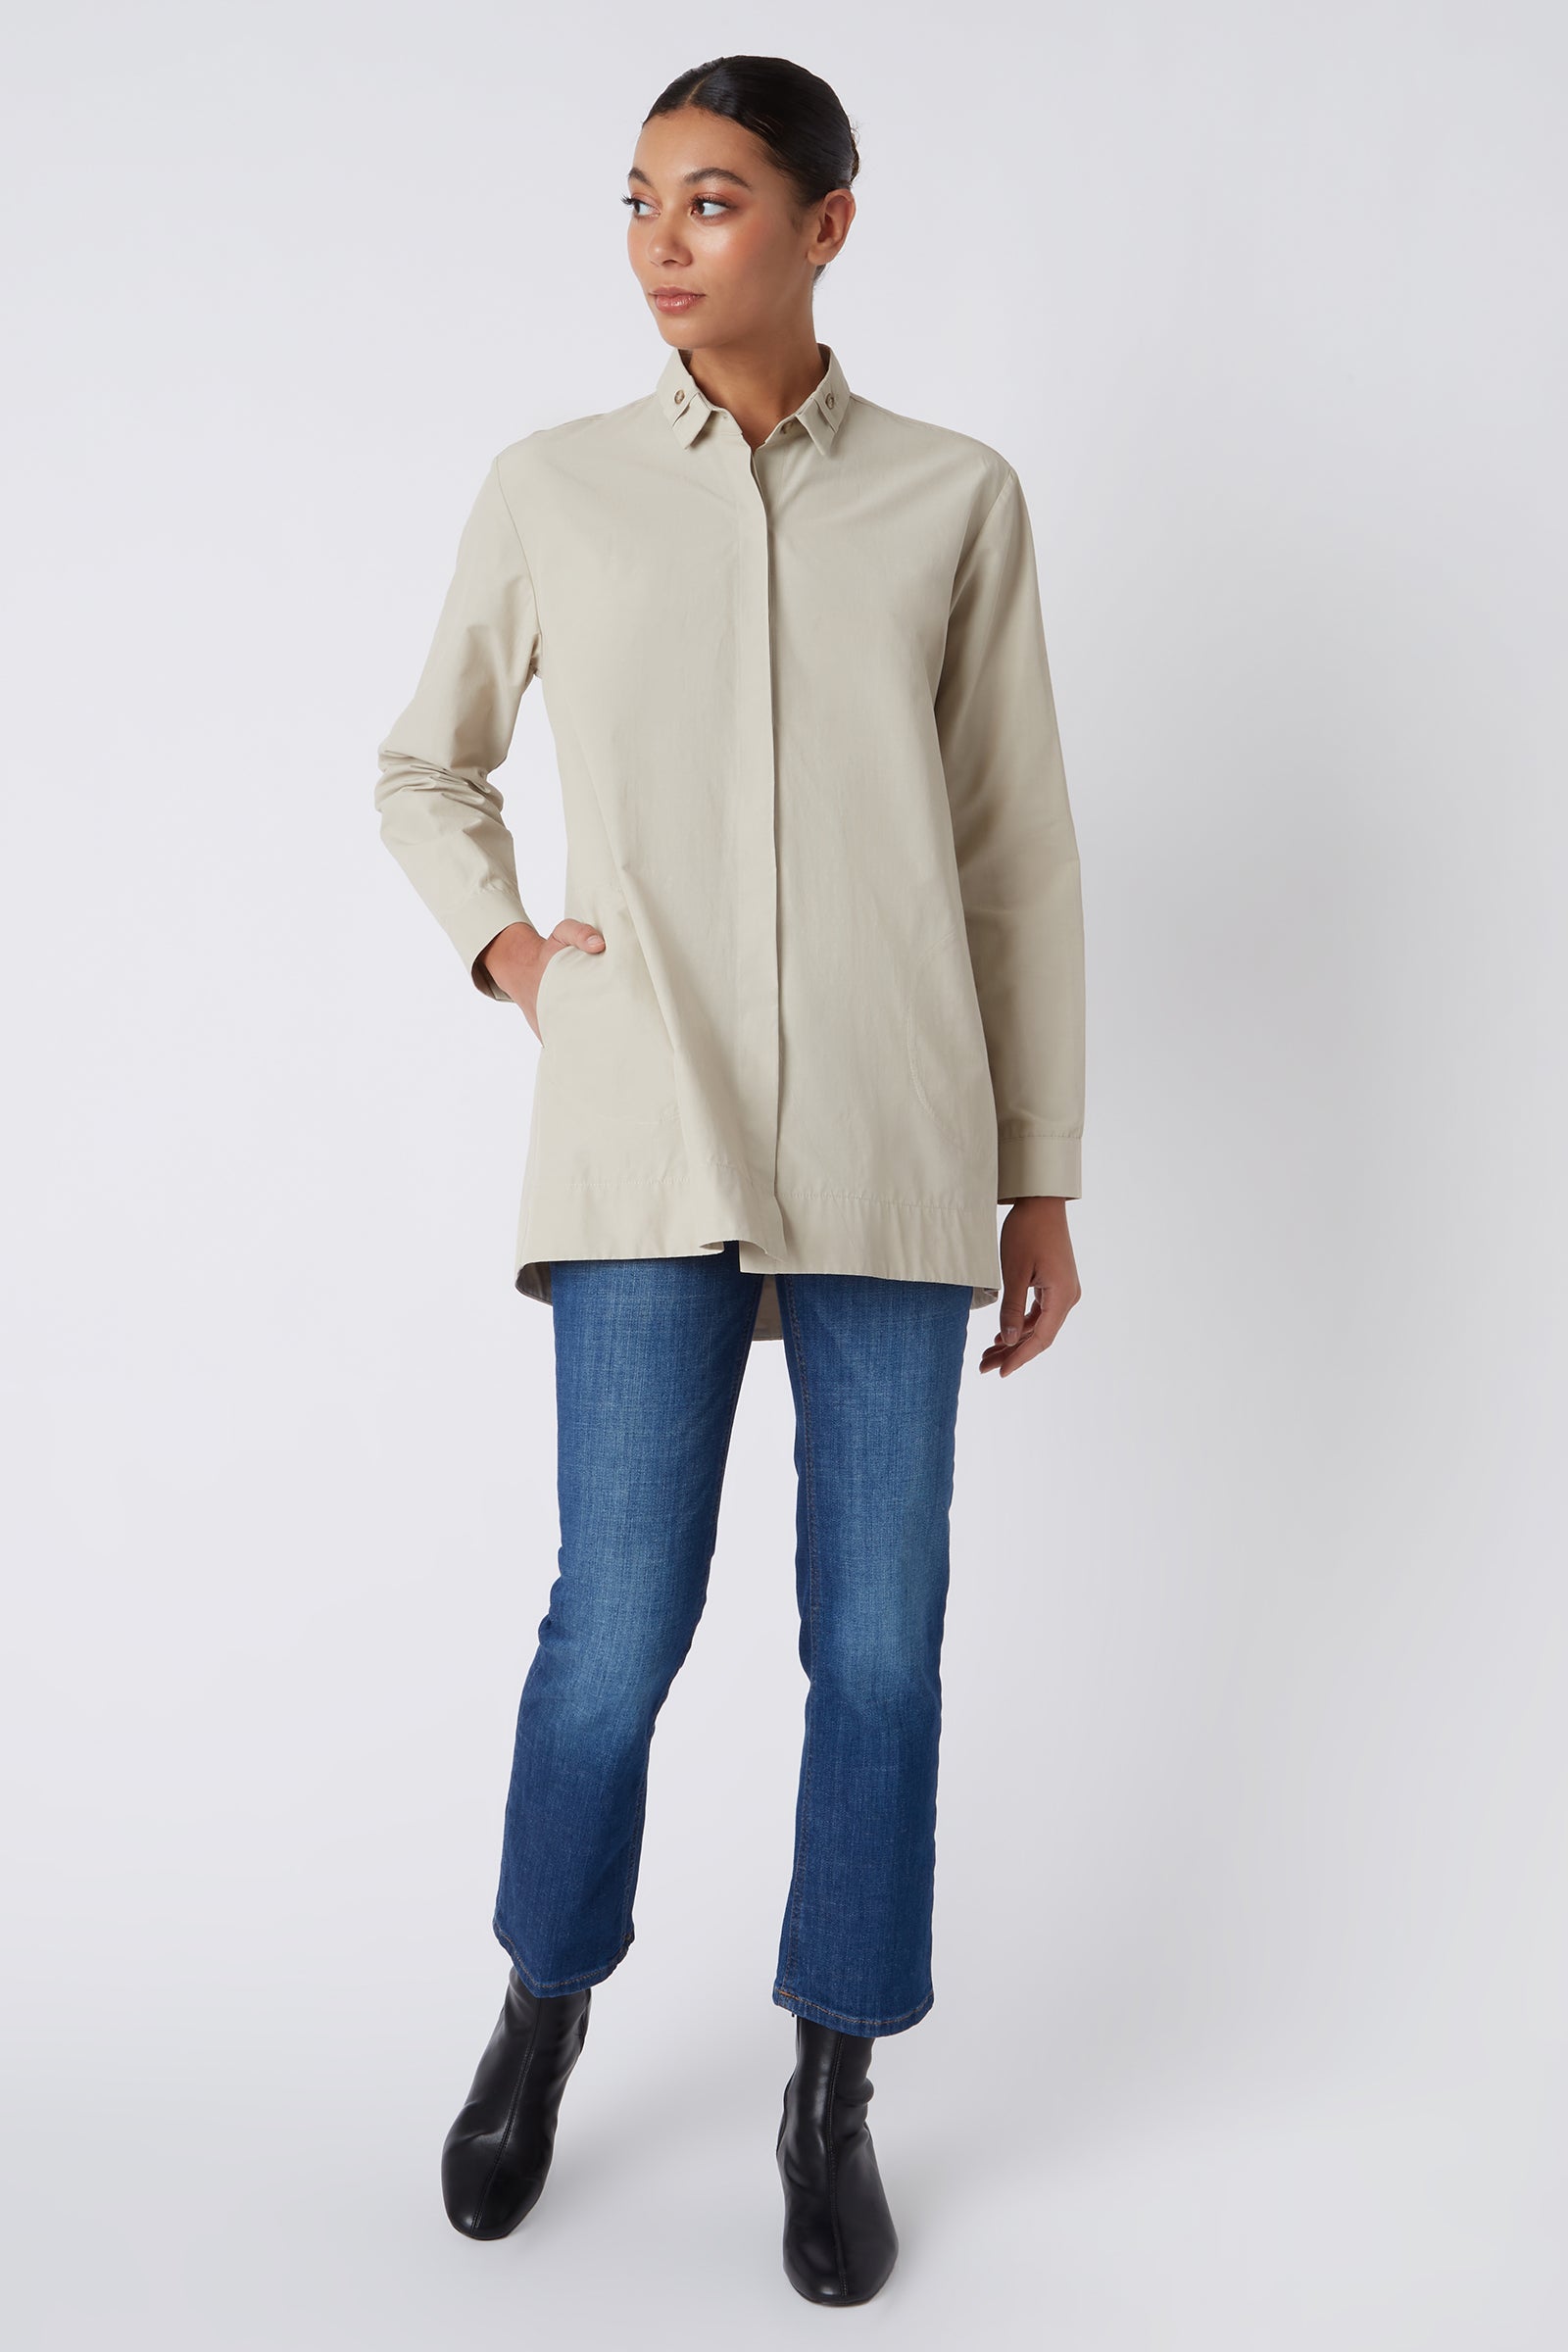 Kal Rieman Lori Tab Collar Tunic in Khaki on Model with Hand in Pocket Full Front View